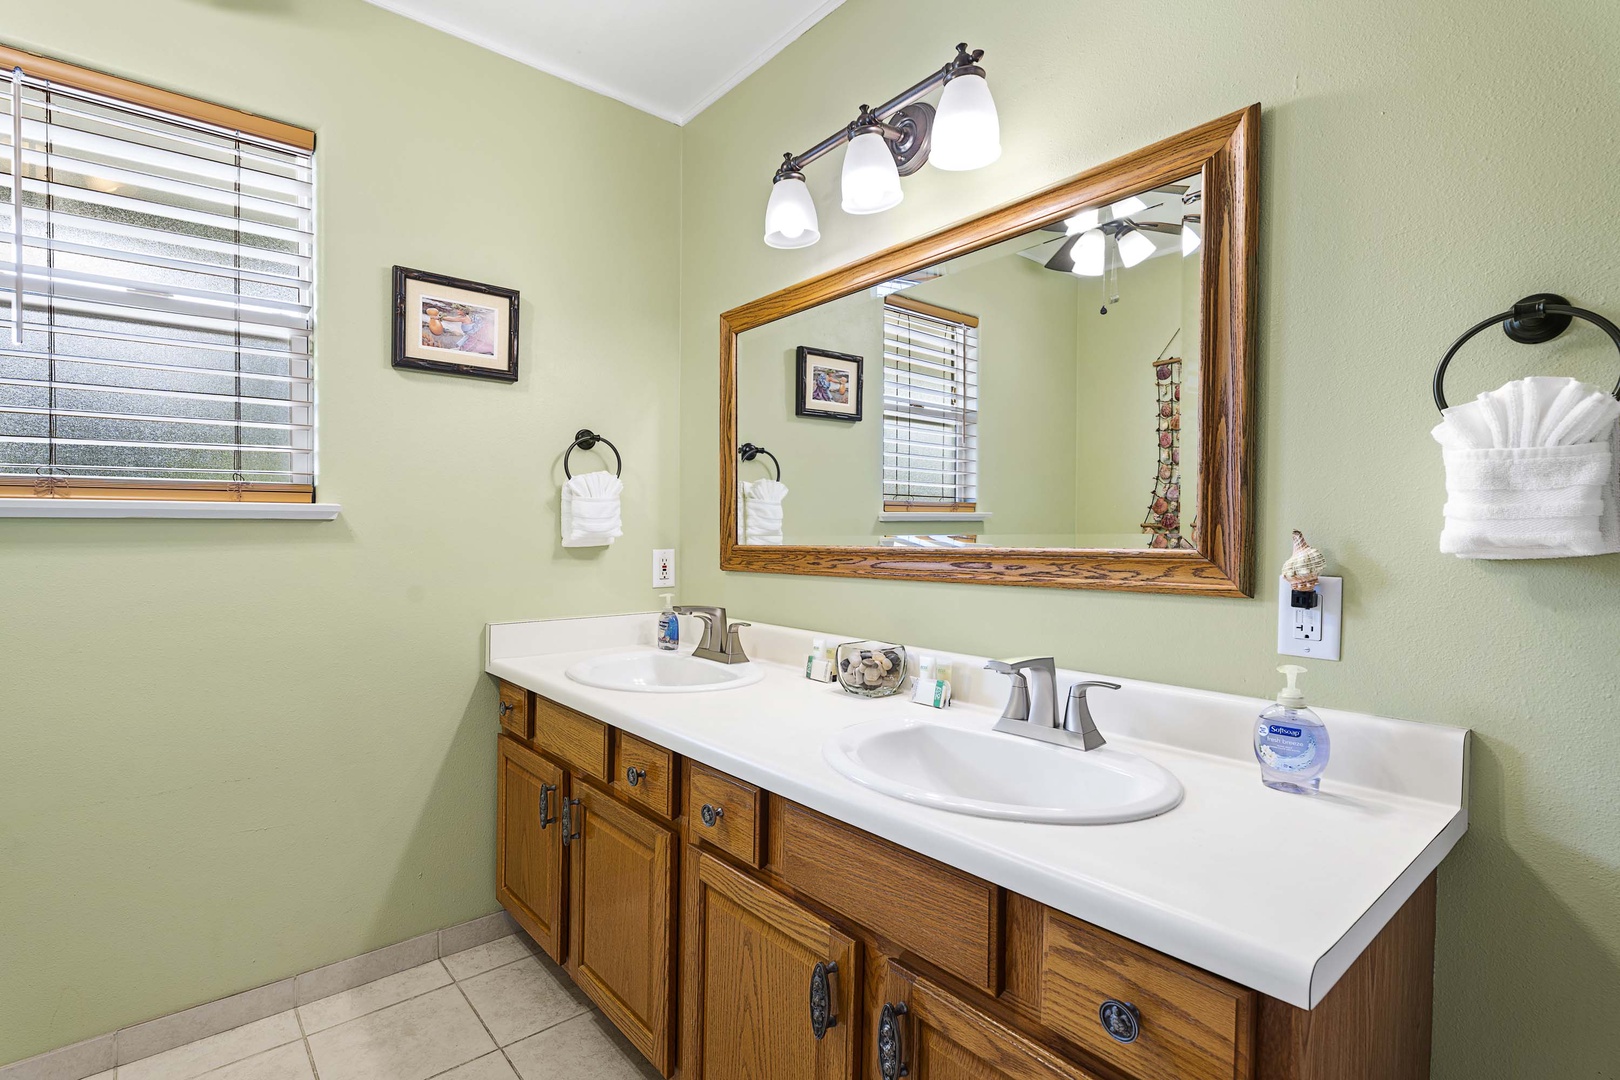 Kailua Kona Vacation Rentals, Hale A Kai - Primary ensuite with tub/shower combo